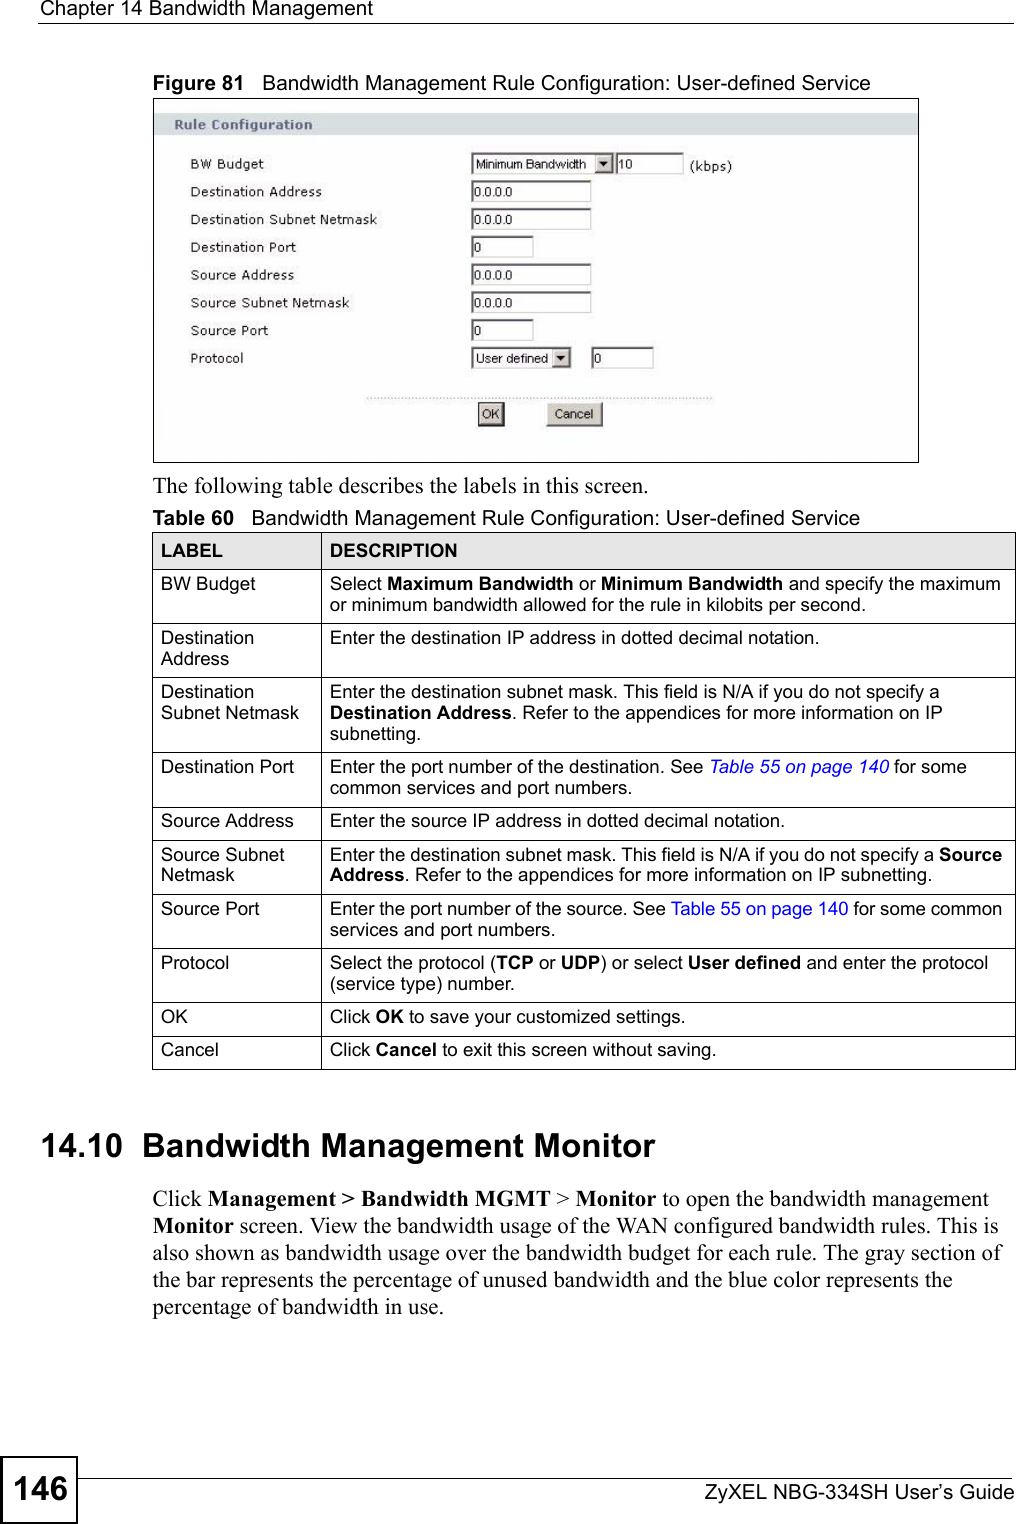 Chapter 14 Bandwidth ManagementZyXEL NBG-334SH User’s Guide146Figure 81   Bandwidth Management Rule Configuration: User-defined ServiceThe following table describes the labels in this screen.14.10  Bandwidth Management Monitor    Click Management &gt; Bandwidth MGMT &gt; Monitor to open the bandwidth management Monitor screen. View the bandwidth usage of the WAN configured bandwidth rules. This is also shown as bandwidth usage over the bandwidth budget for each rule. The gray section of the bar represents the percentage of unused bandwidth and the blue color represents the percentage of bandwidth in use.Table 60   Bandwidth Management Rule Configuration: User-defined ServiceLABEL DESCRIPTIONBW Budget Select Maximum Bandwidth or Minimum Bandwidth and specify the maximum or minimum bandwidth allowed for the rule in kilobits per second. Destination AddressEnter the destination IP address in dotted decimal notation.Destination Subnet NetmaskEnter the destination subnet mask. This field is N/A if you do not specify a Destination Address. Refer to the appendices for more information on IP subnetting.Destination Port Enter the port number of the destination. See Table 55 on page 140 for some common services and port numbers.Source Address Enter the source IP address in dotted decimal notation.Source Subnet NetmaskEnter the destination subnet mask. This field is N/A if you do not specify a Source Address. Refer to the appendices for more information on IP subnetting.Source Port Enter the port number of the source. See Table 55 on page 140 for some common services and port numbers.Protocol Select the protocol (TCP or UDP) or select User defined and enter the protocol (service type) number. OK Click OK to save your customized settings.Cancel Click Cancel to exit this screen without saving.